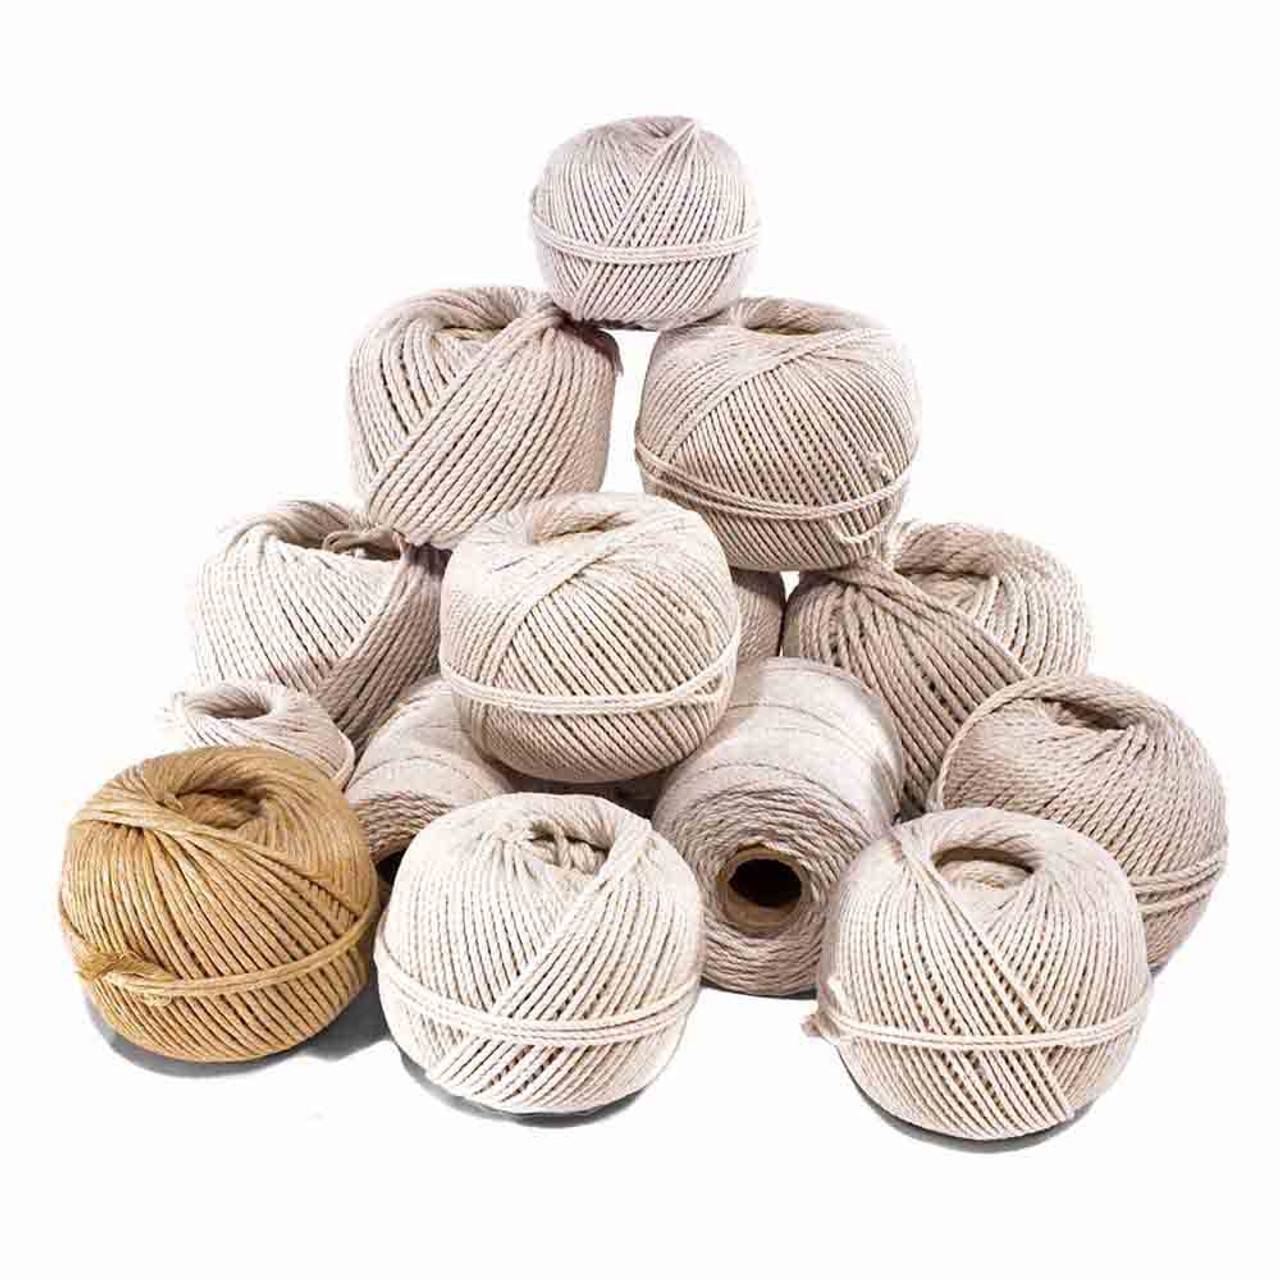 100% Natural Cotton Rope (1 in x 100 ft) Thick White Rope for